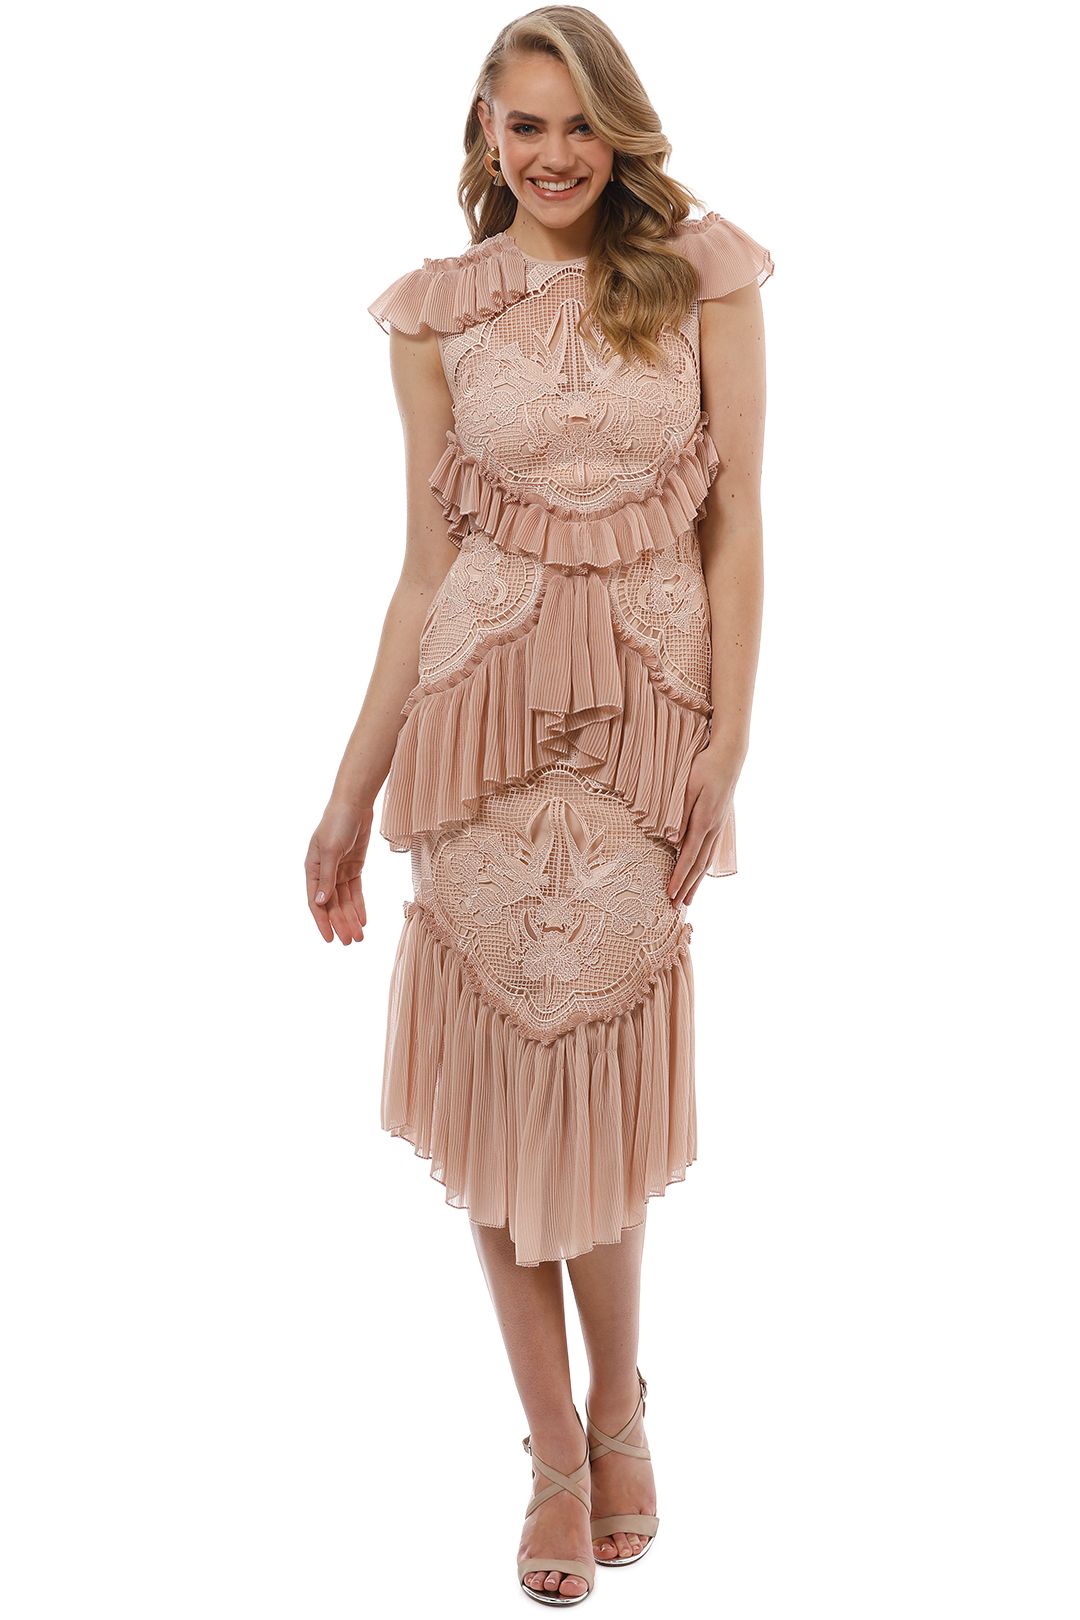 Alice McCall - Sweet Emotion Dress - Rose - Front